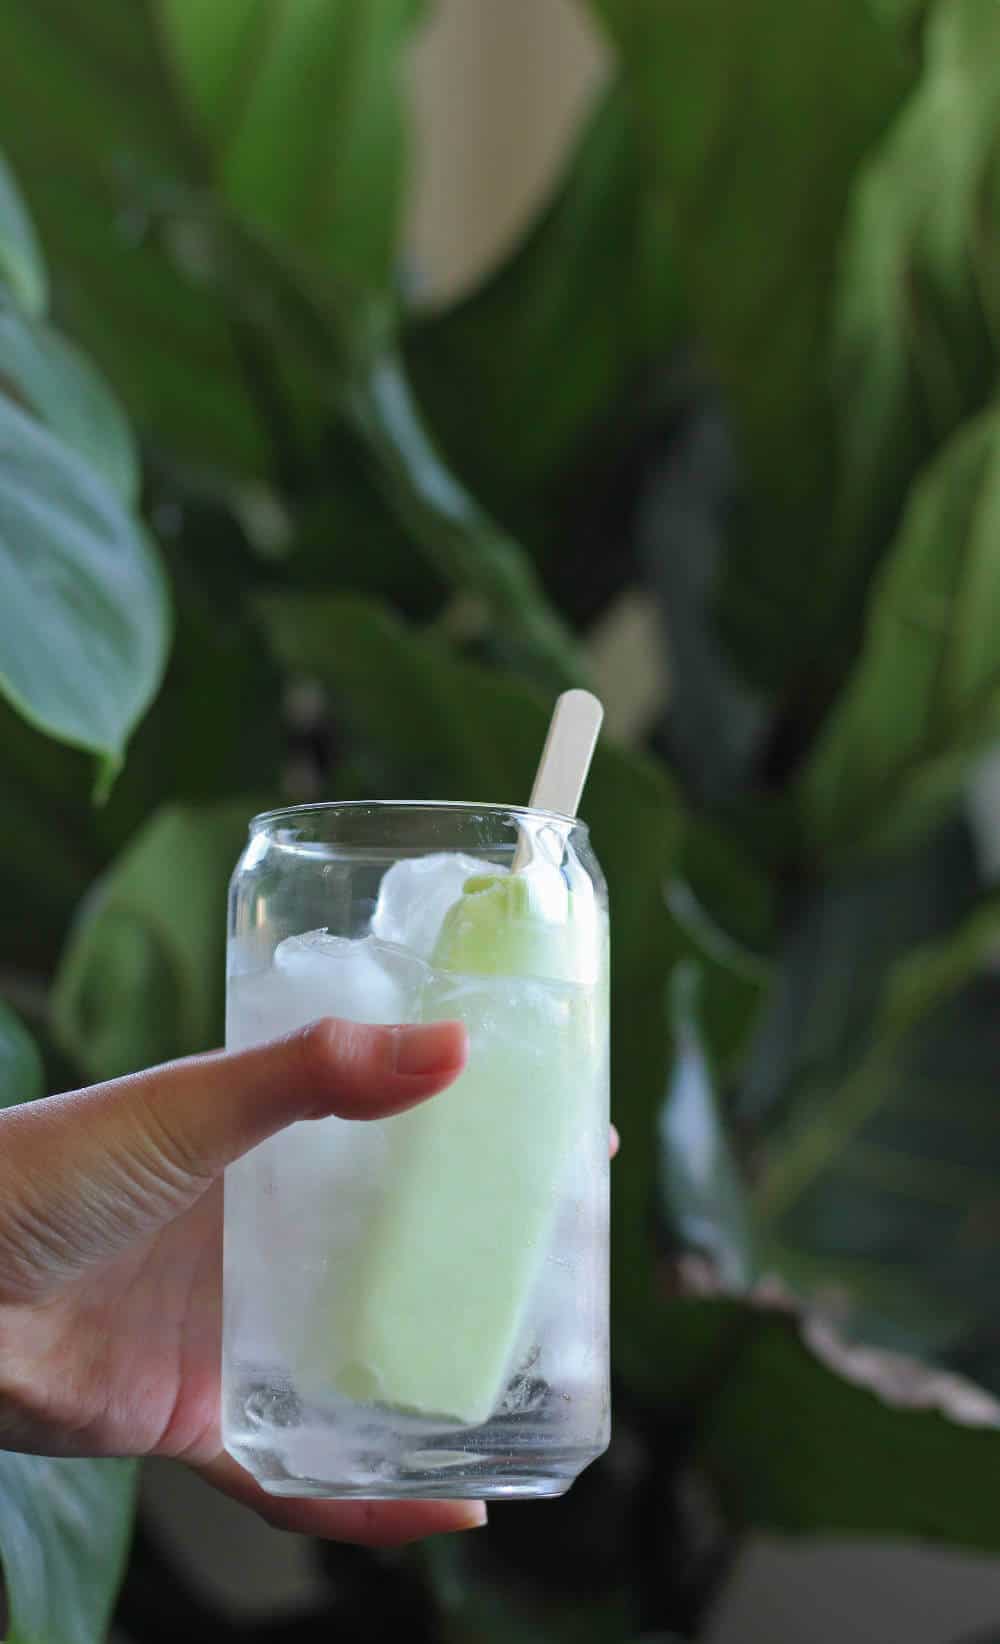 Hand holding a clear glass with a clear cocktail and a green popsicle in front of a plant.